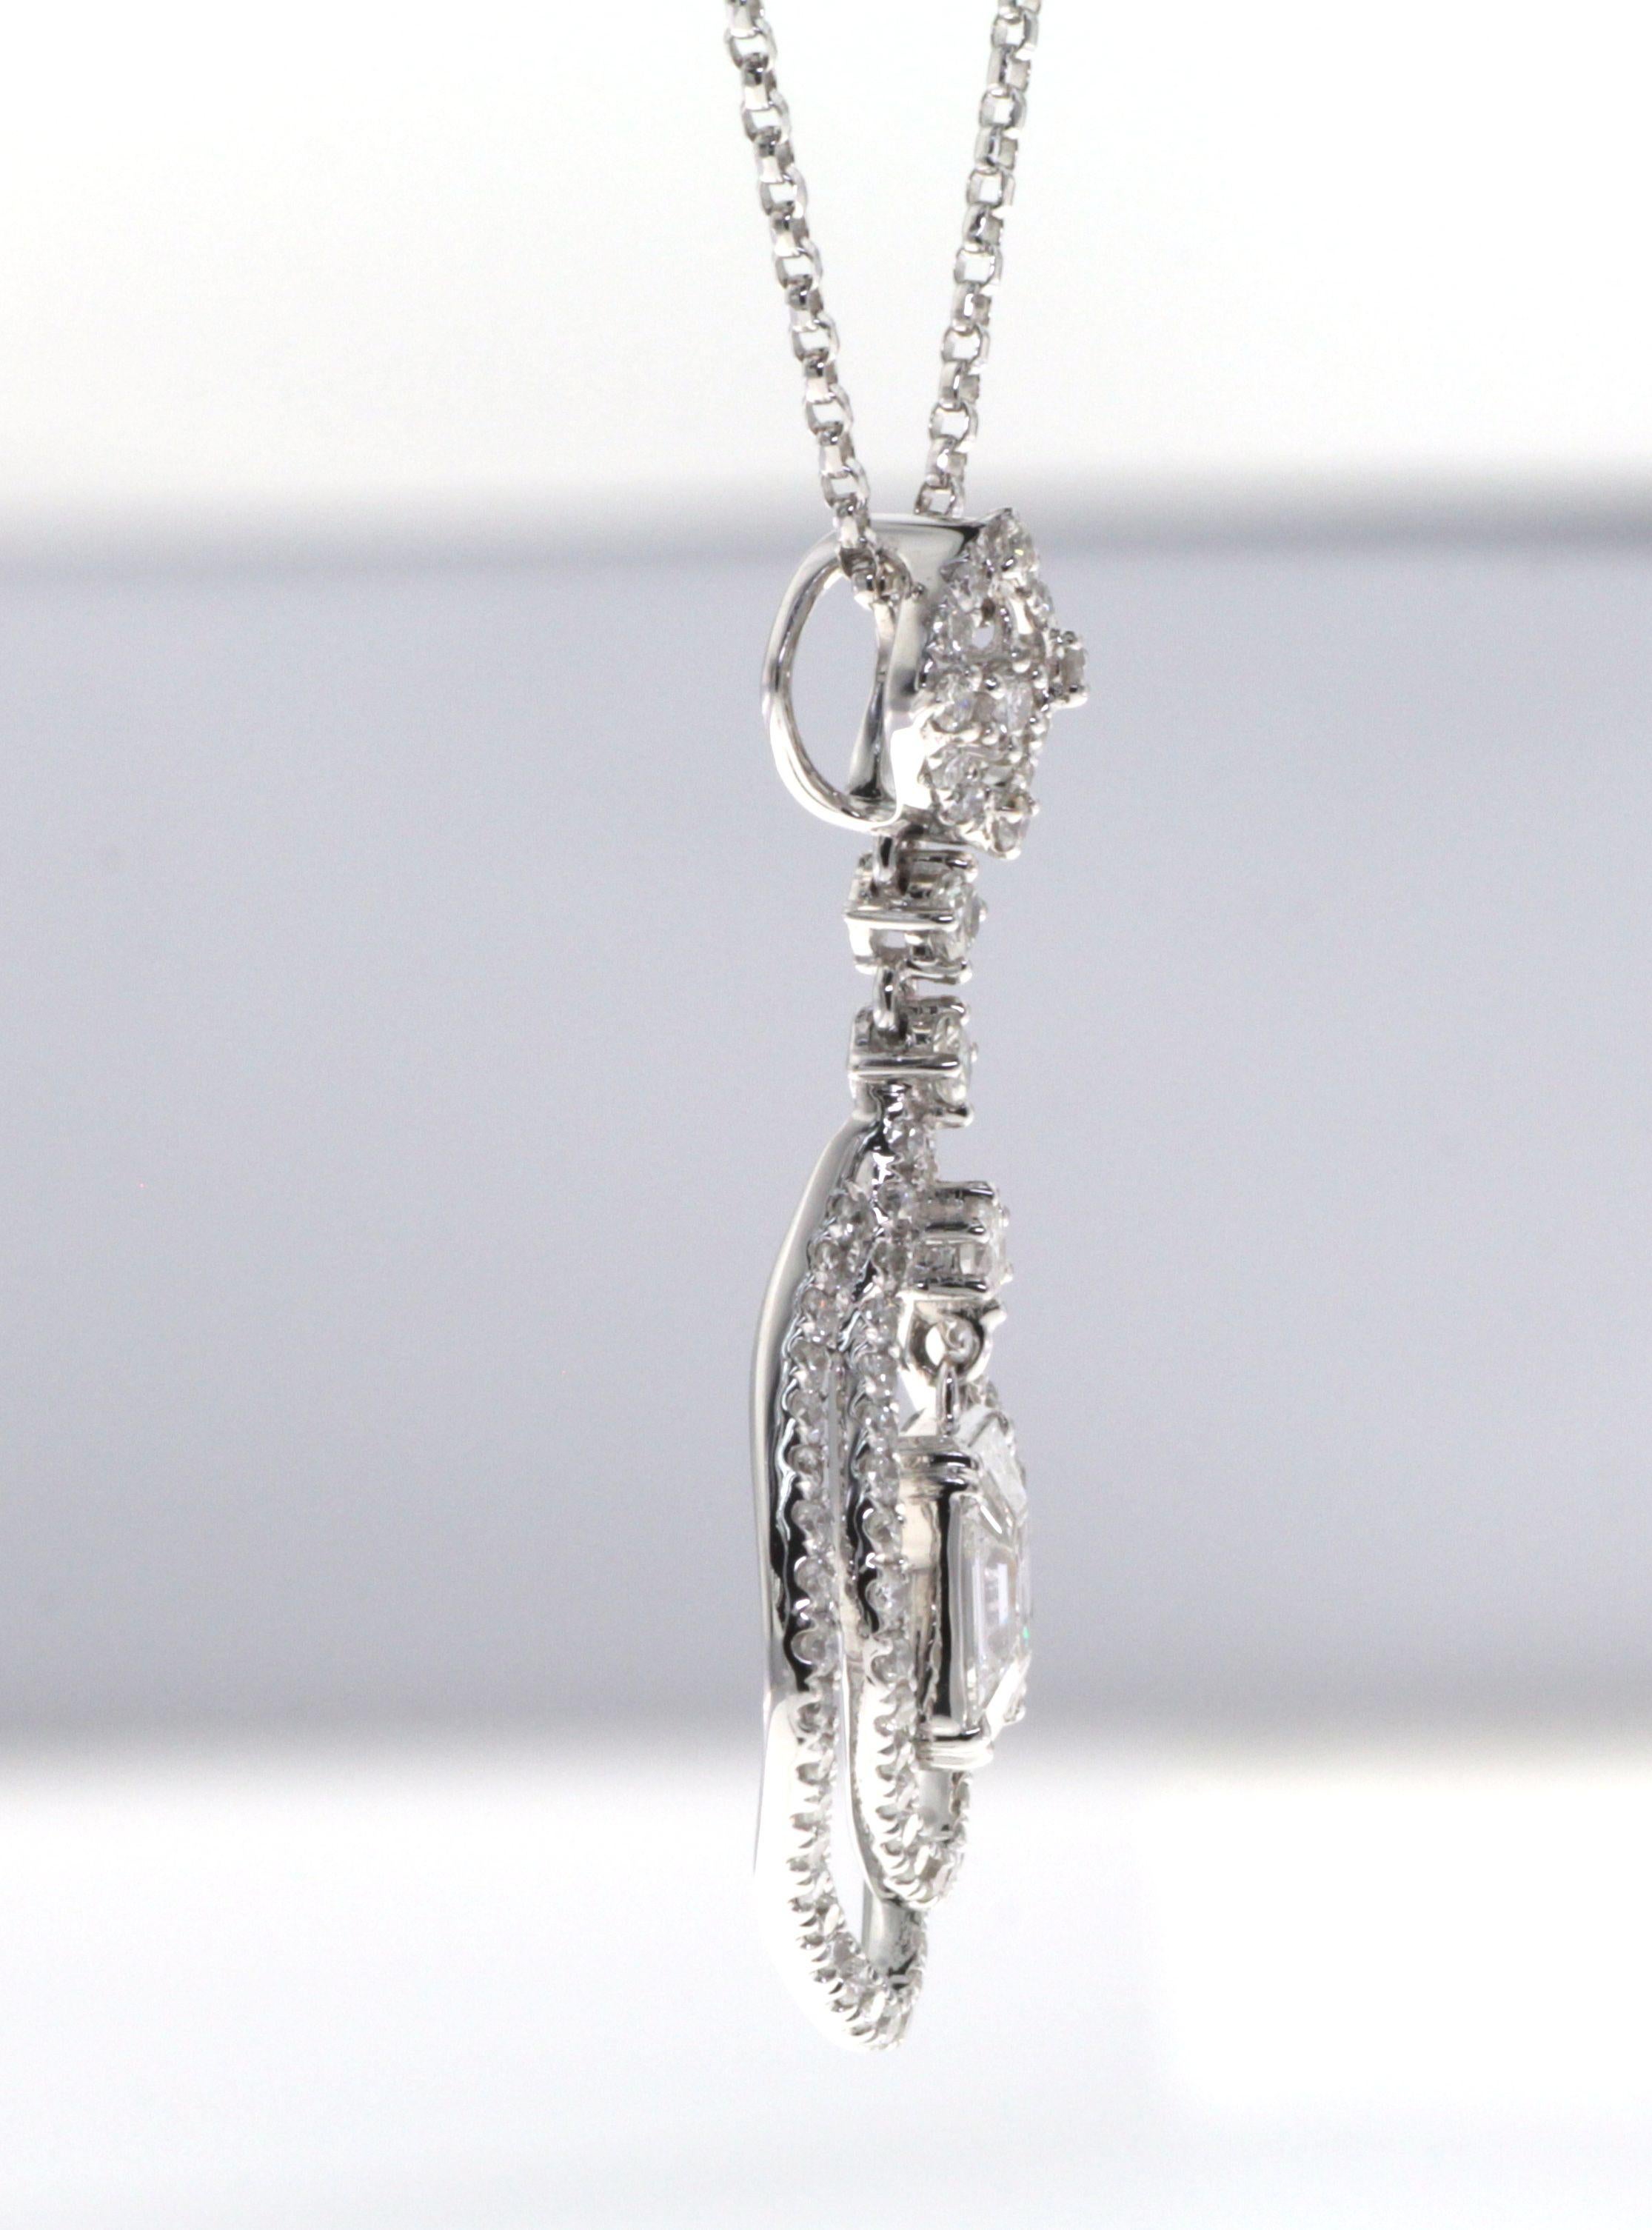 This pendant necklace is a masterpiece of illusion and reality, blending the artistry of jewelry design with the inherent beauty of diamonds. Suspended elegantly from an 18K white gold chain, the pendant is a triumph of craftsmanship and style.

The